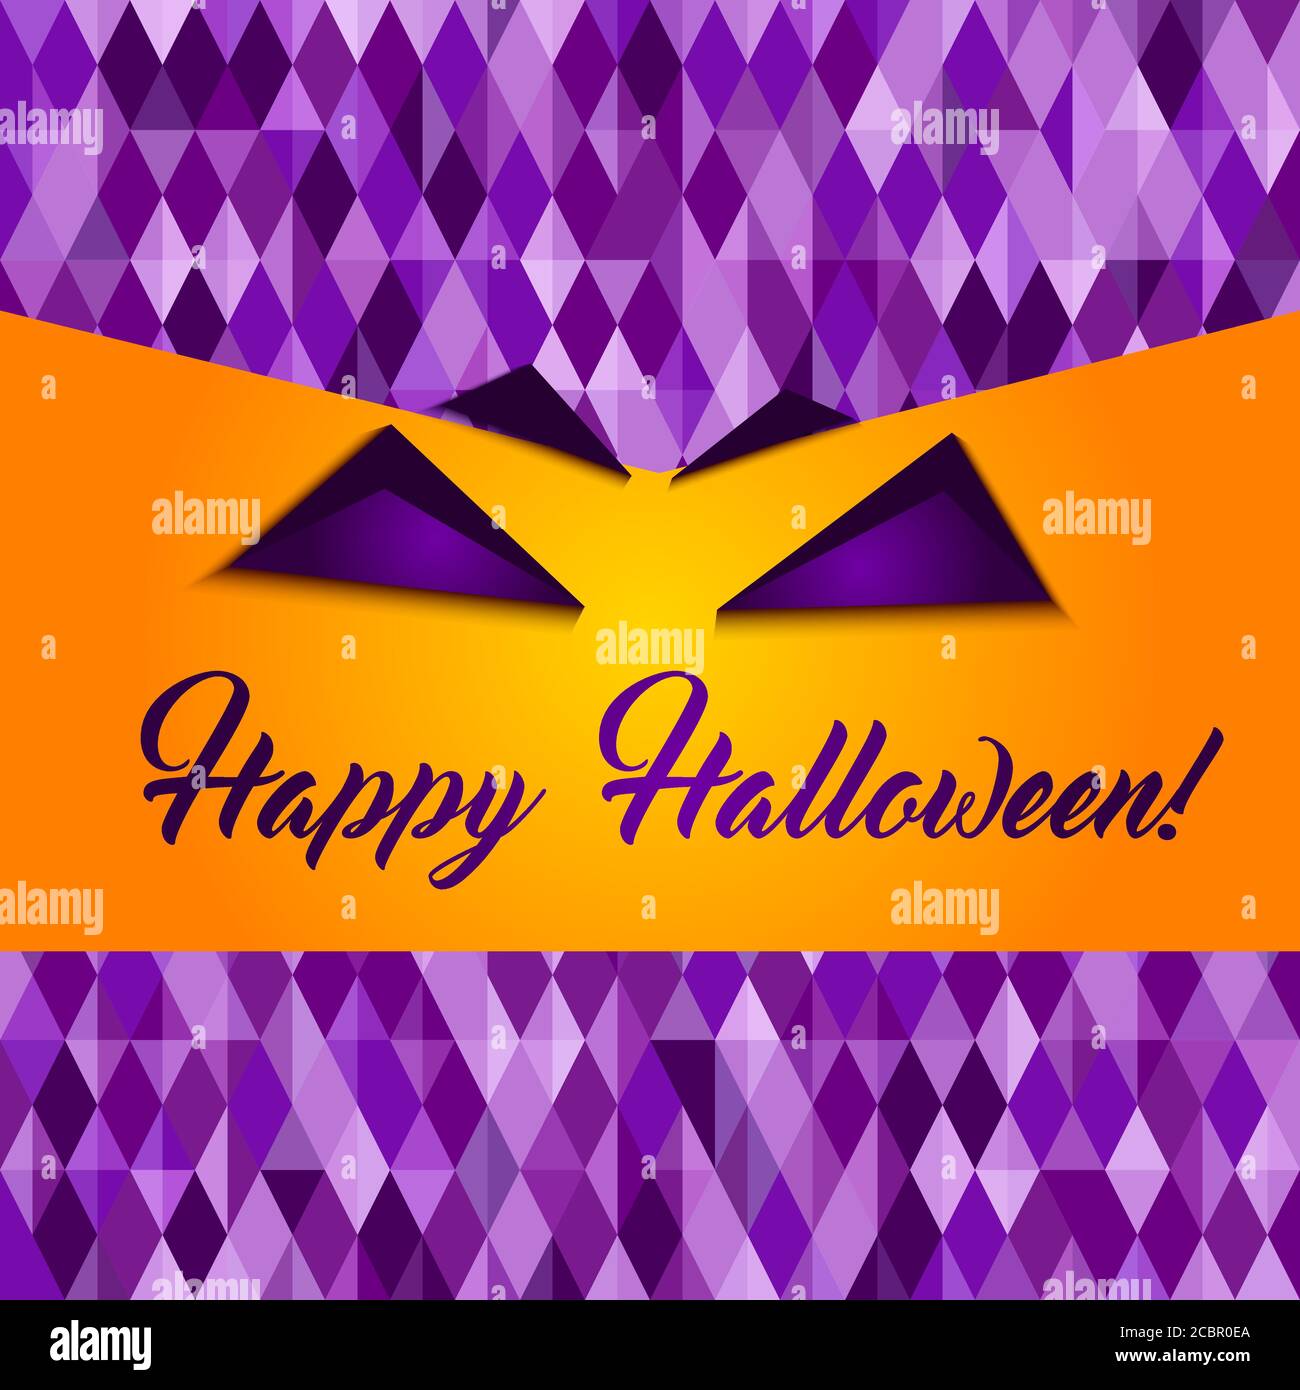 Happy Halloween greeting card, Abstract geometric pattern, diamond shapes. Traditional colors for Halloween background, yellow, orange, purple. Hallow Stock Vector